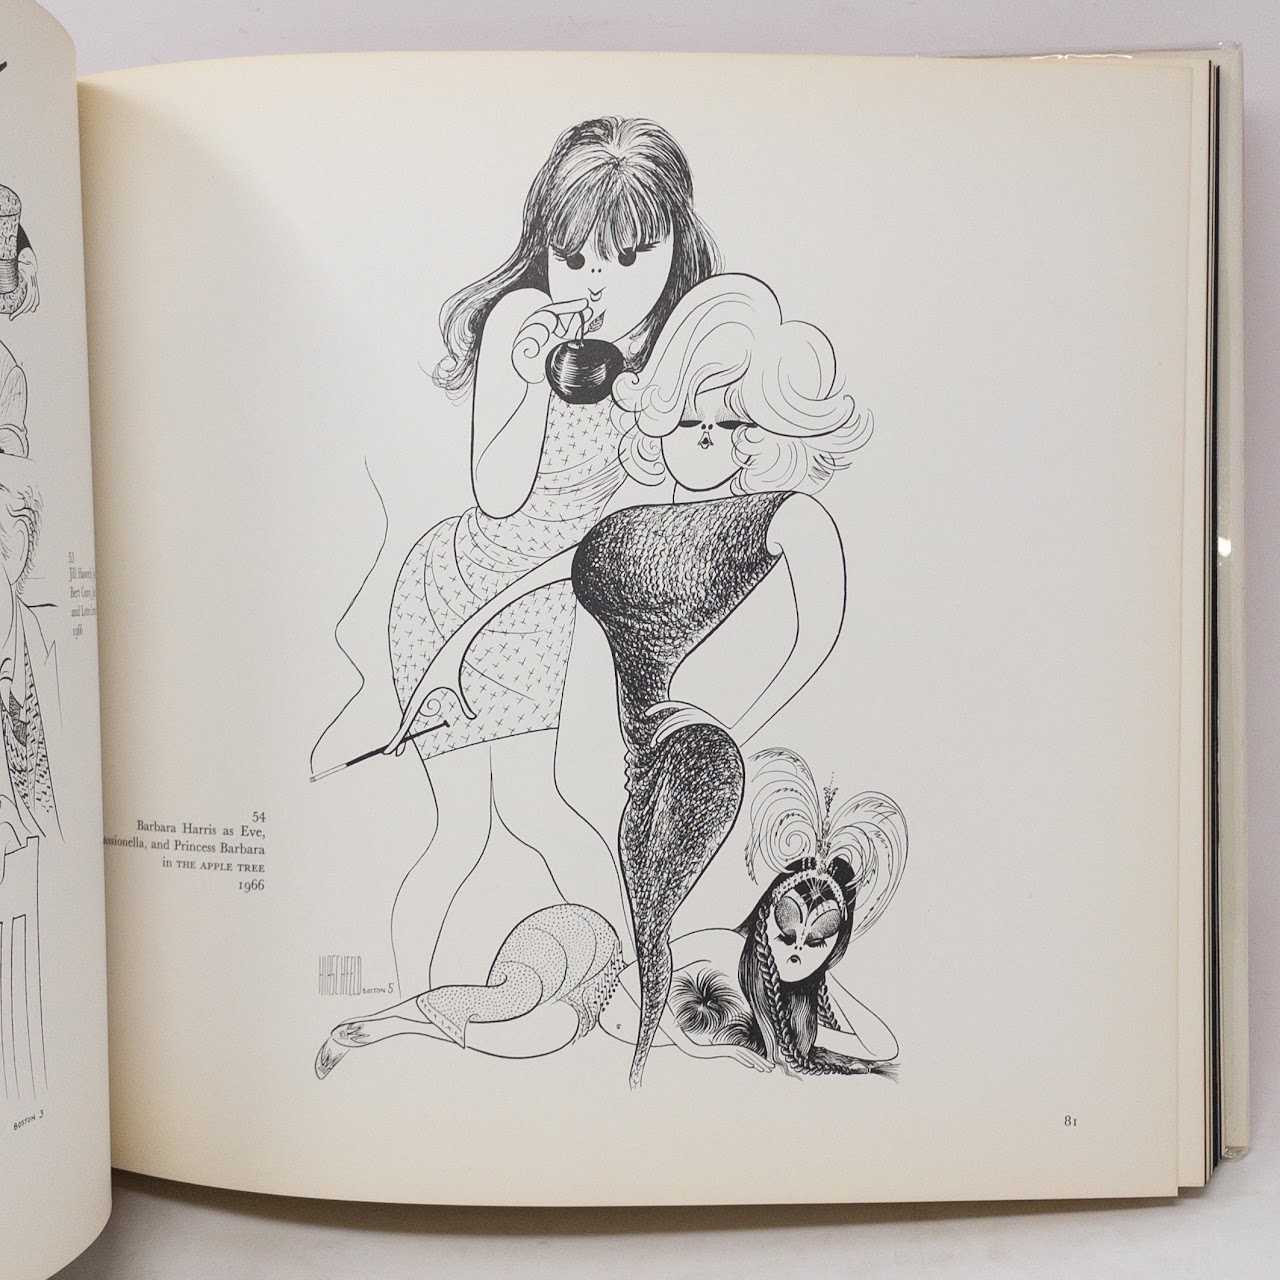 "The World Of Al Hirschfeld" Collection Of Works RARE Book